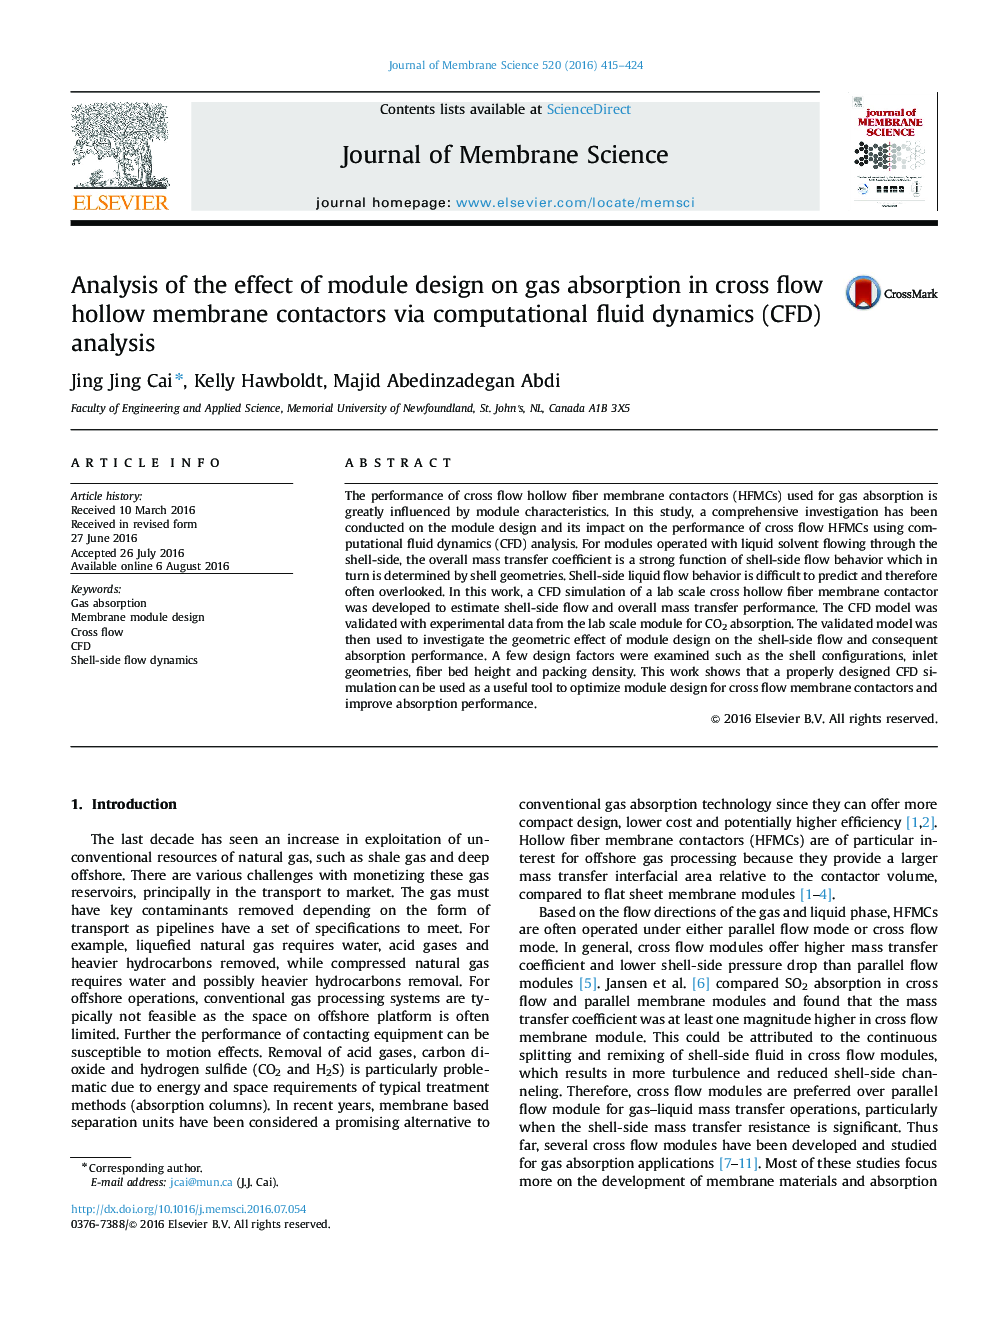 Analysis of the effect of module design on gas absorption in cross flow hollow membrane contactors via computational fluid dynamics (CFD) analysis